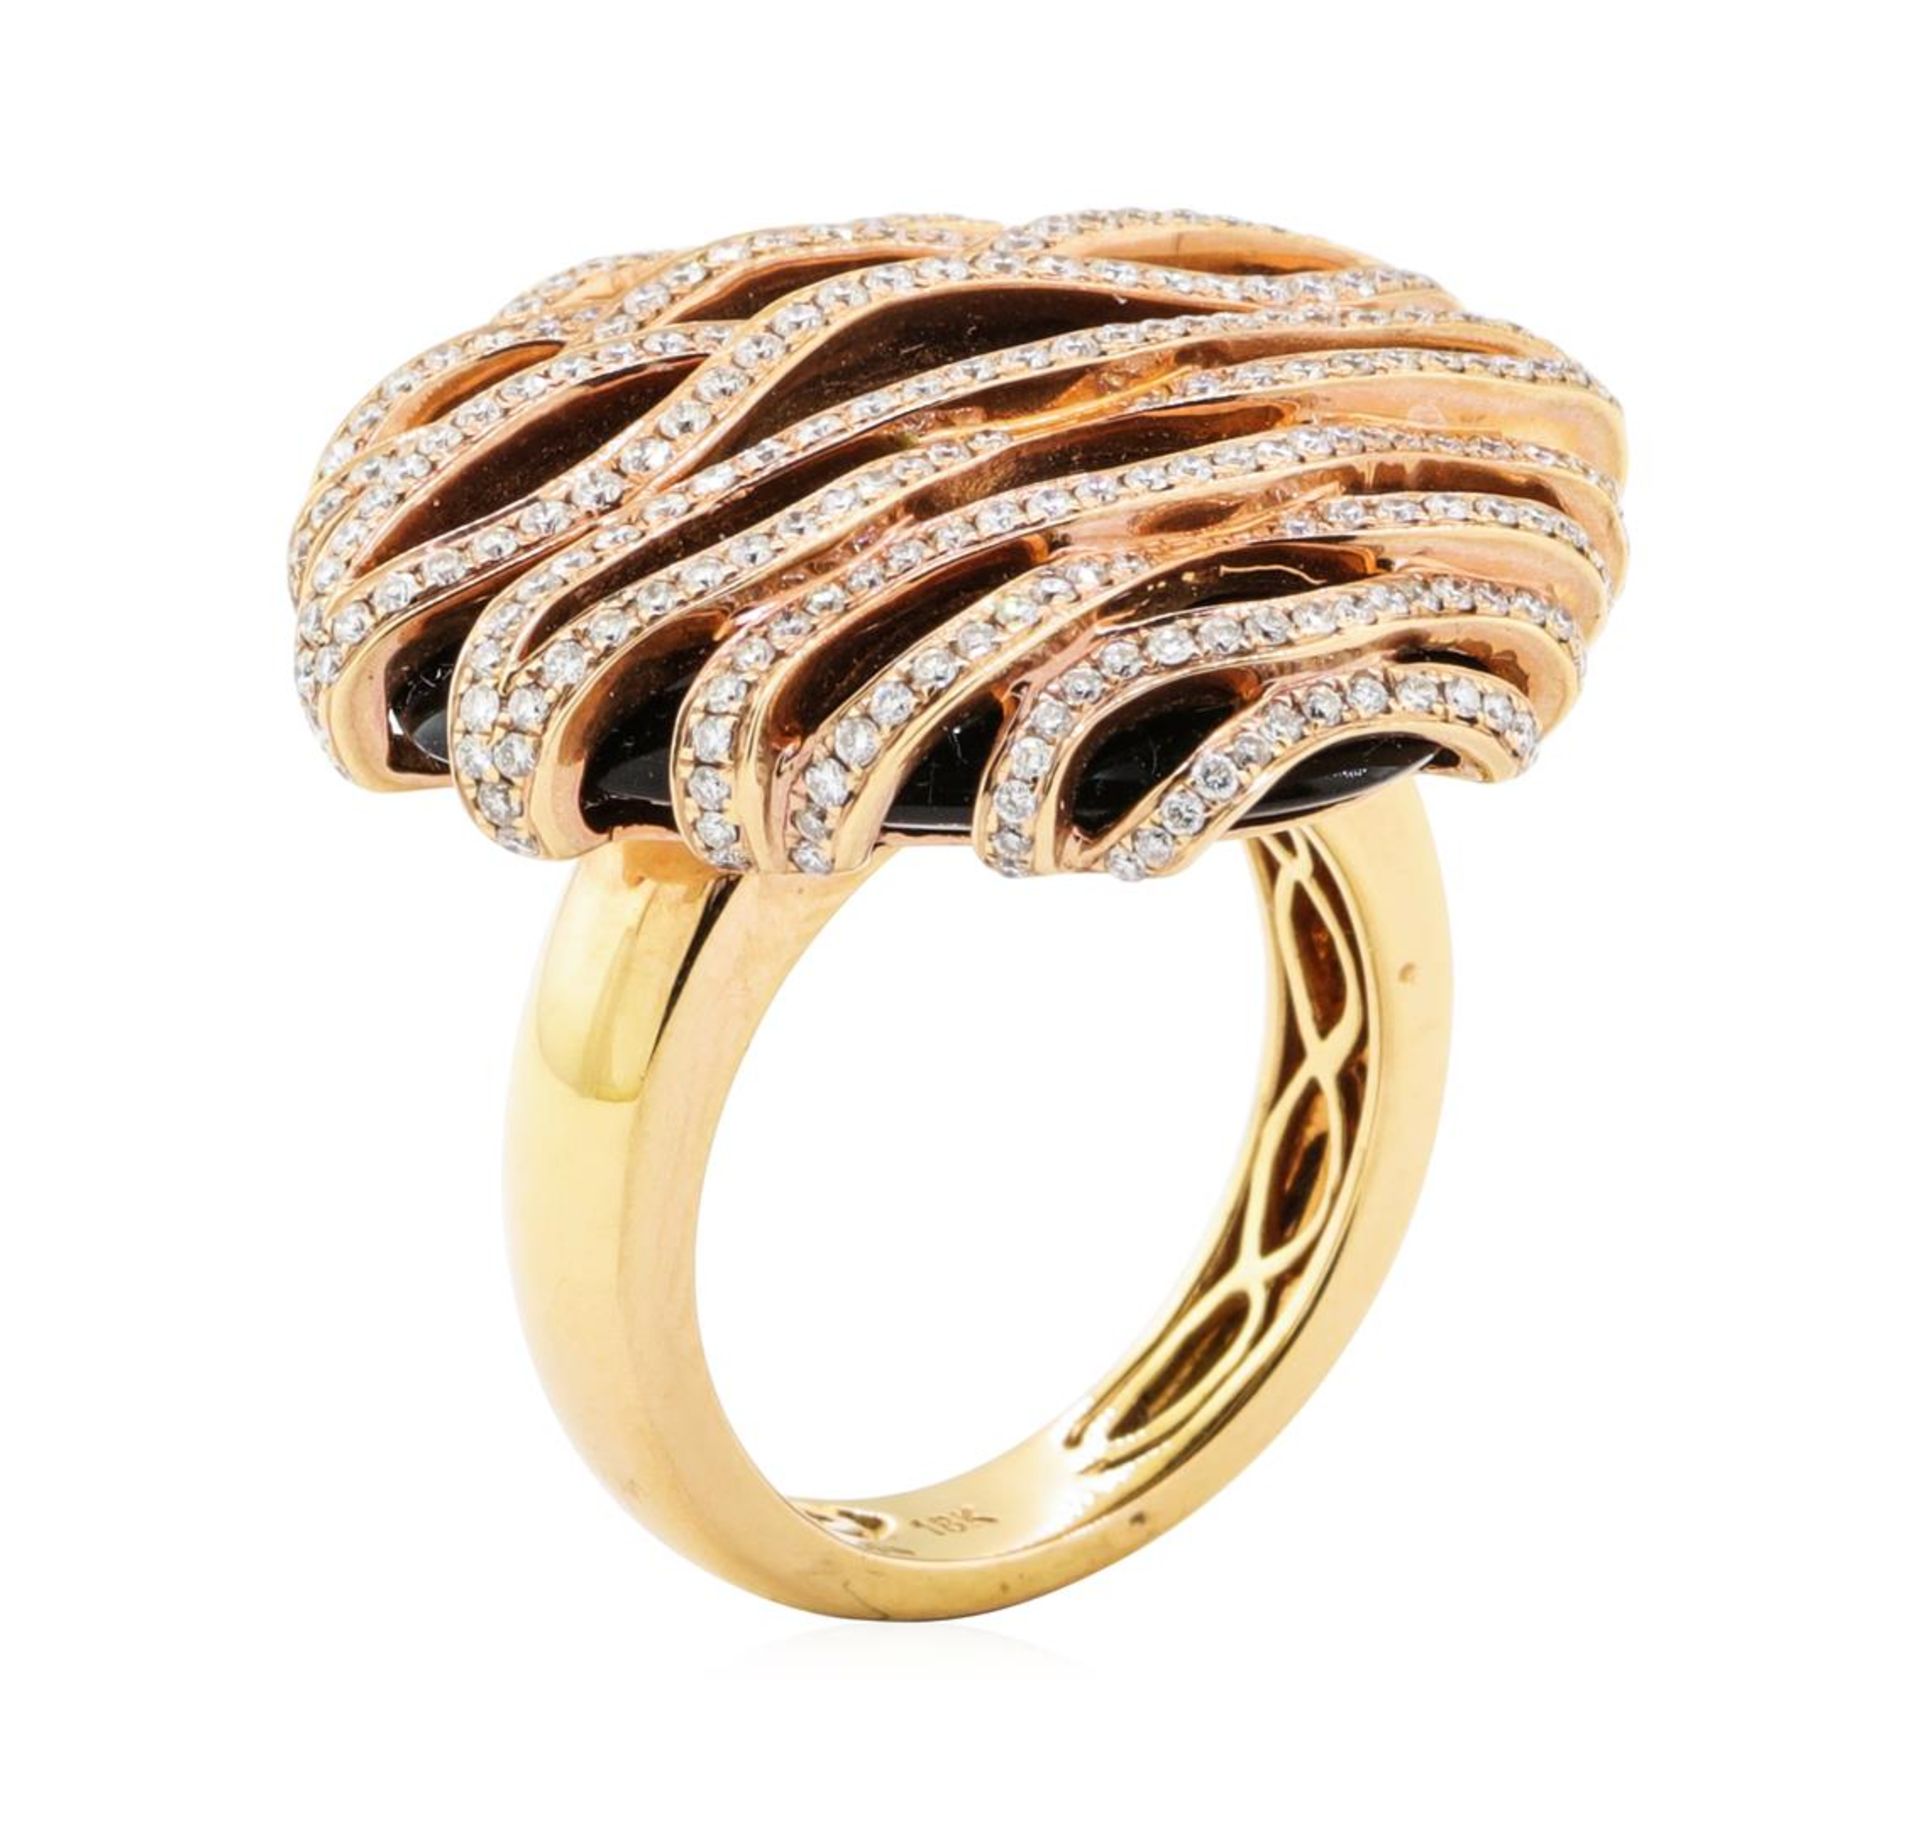 1.65 ctw Diamond and Onyx Ring - 18KT Rose Gold - Image 4 of 4